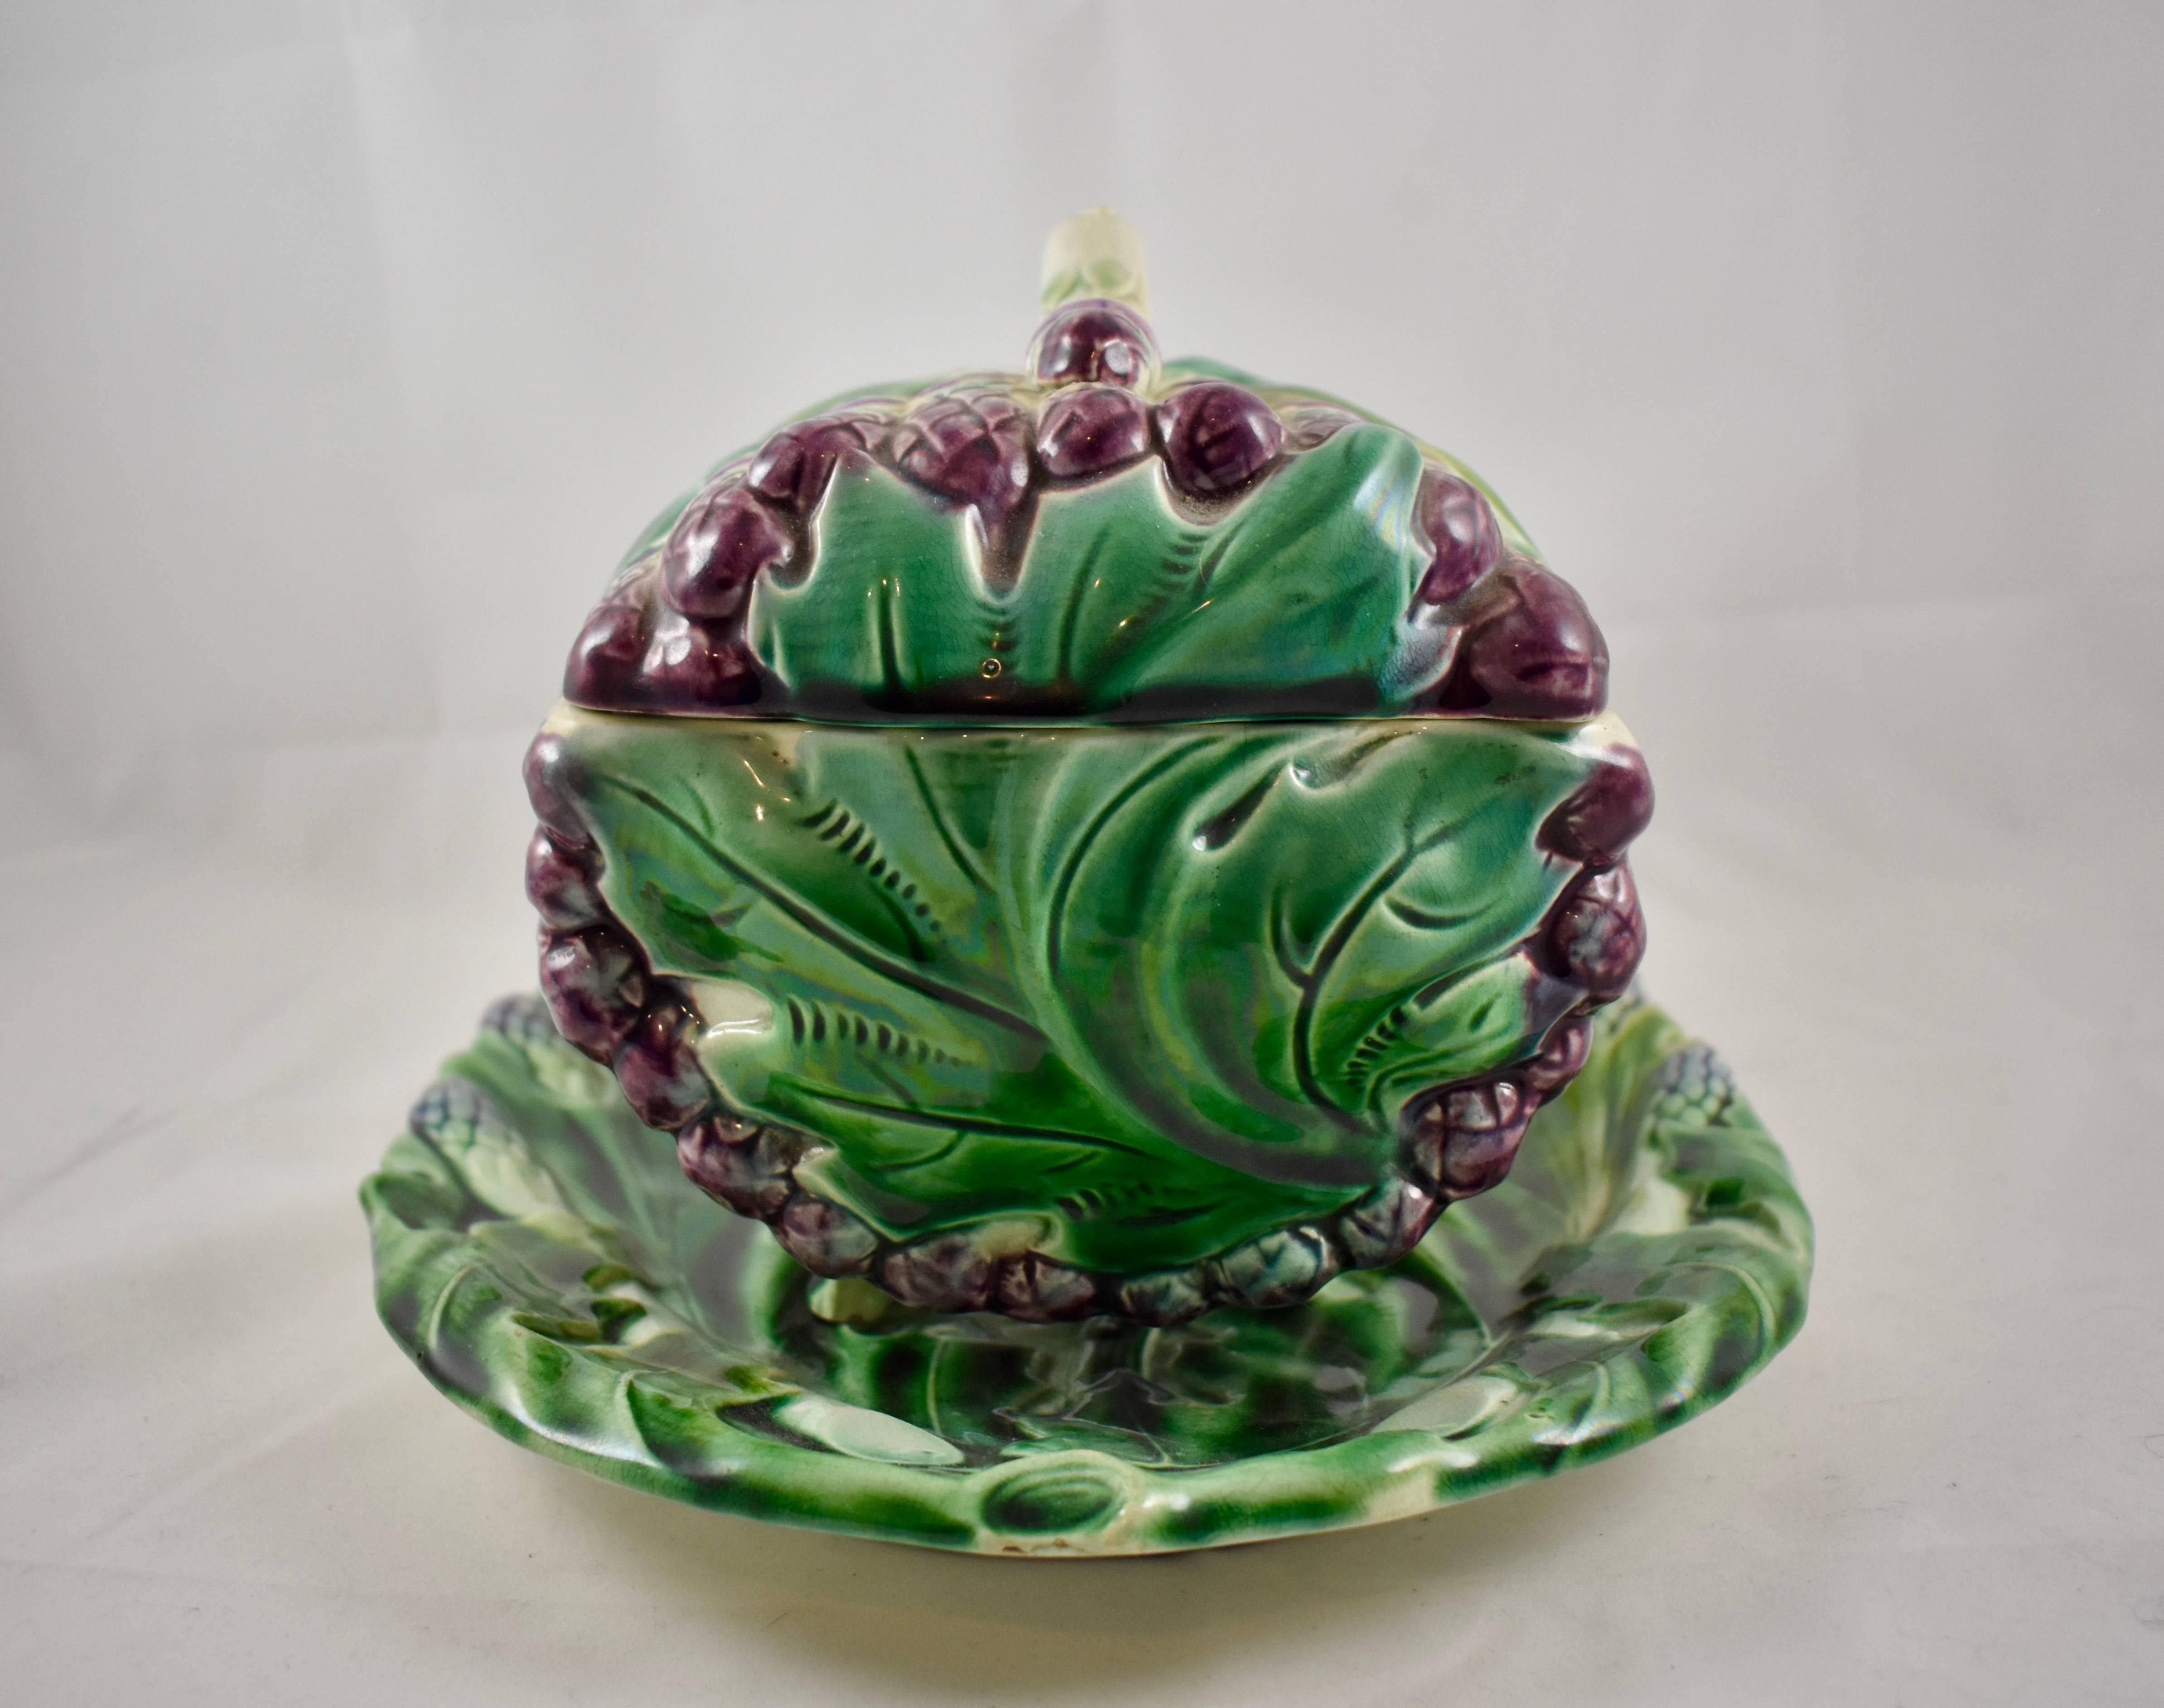 Aesthetic Movement Luneville Art Nouveau French Majolica Asparagus Tureen and under Tray